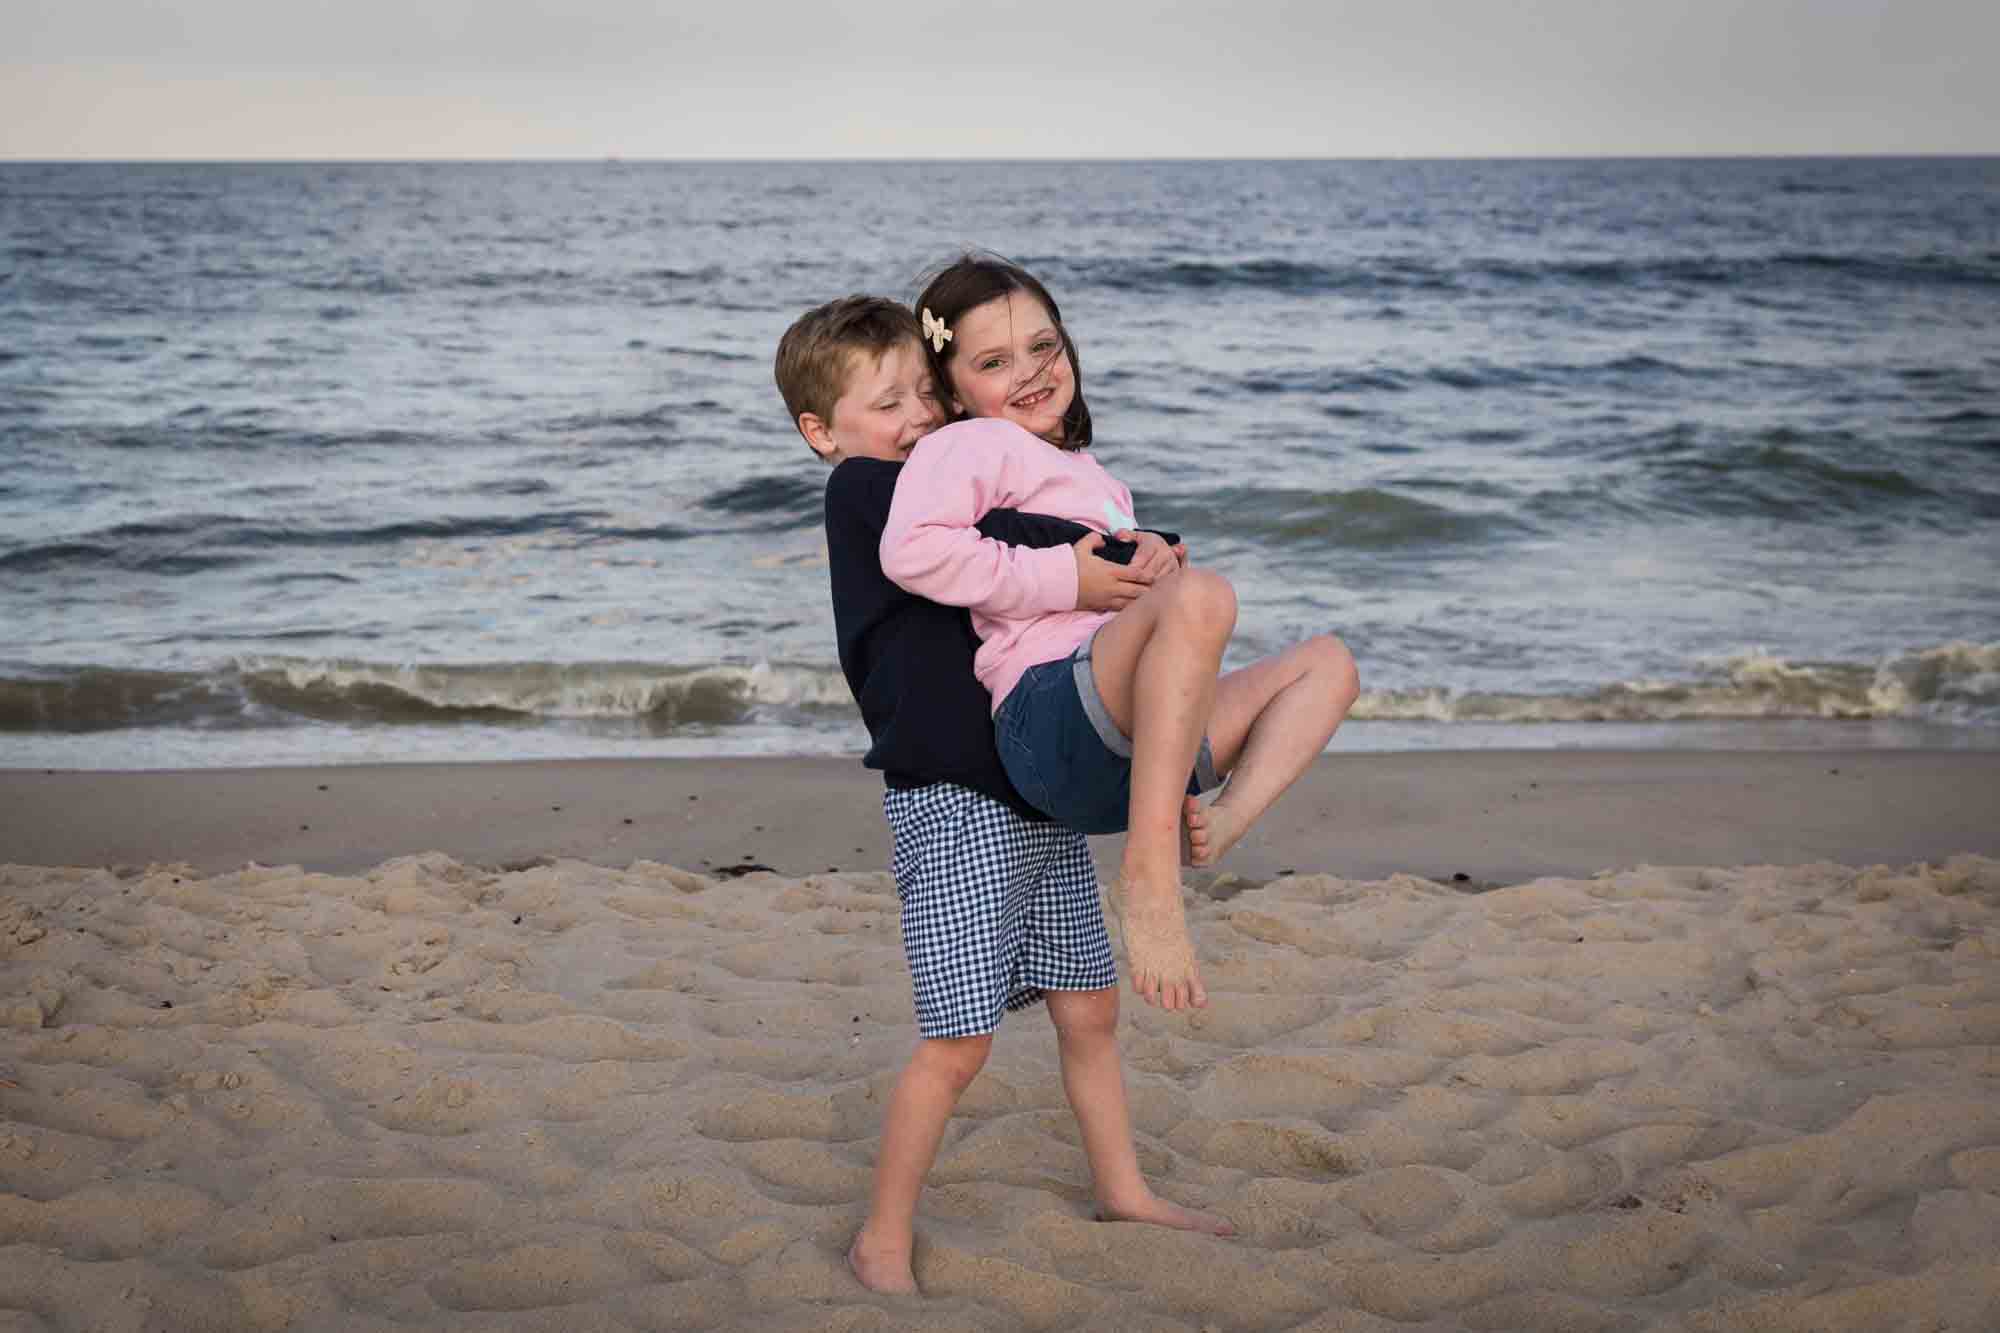 Little boy lifting up little girl on beach in front of ocean